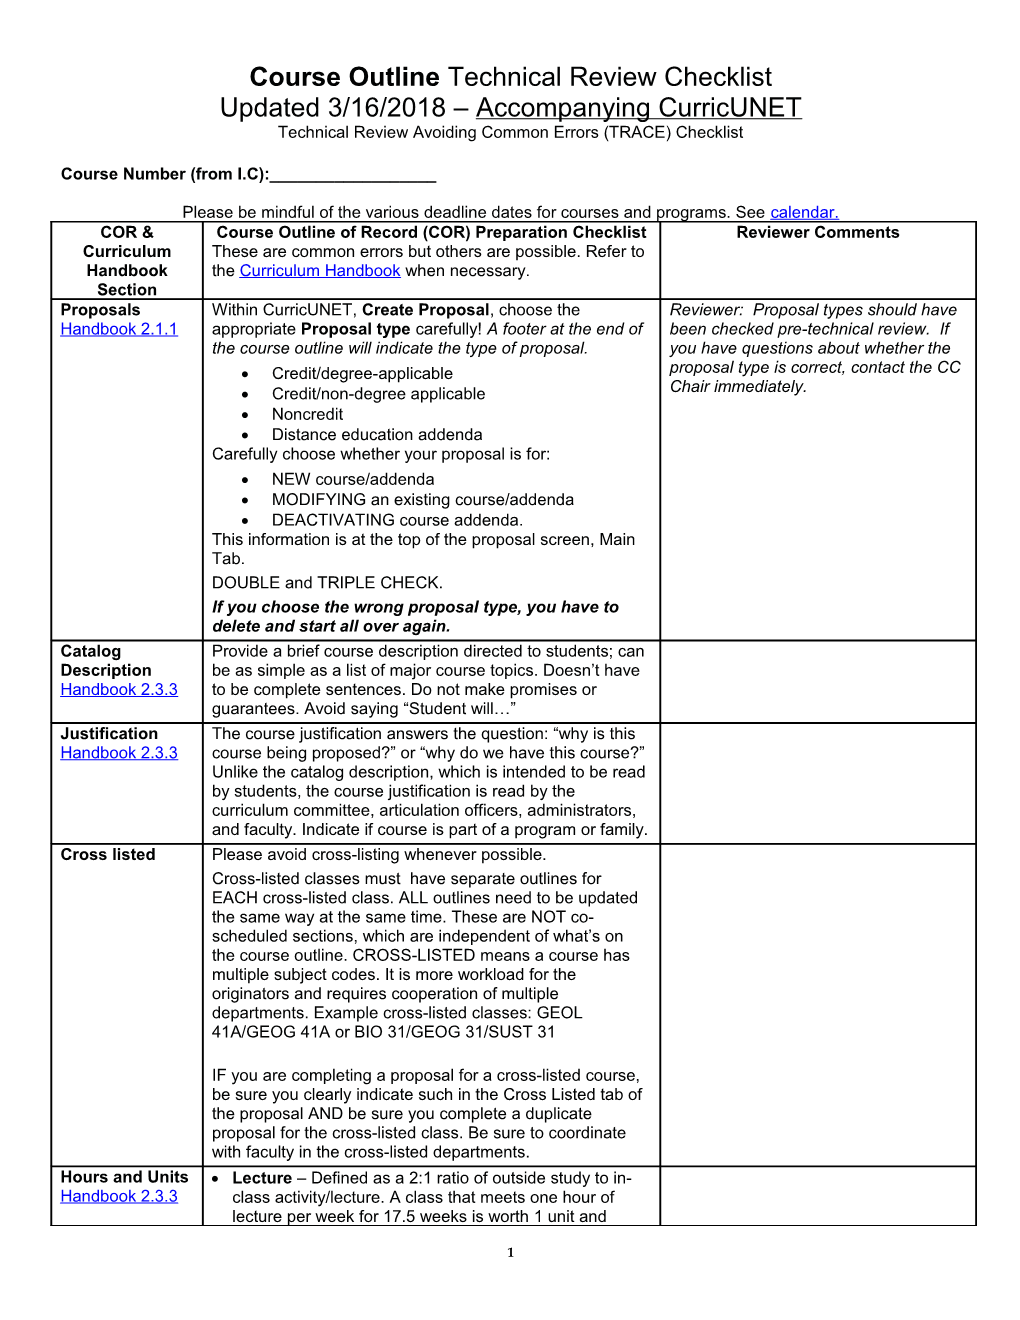 Course Outlinetechnical Review Checklist Updated 3/16/2018 Accompanying Curricunet